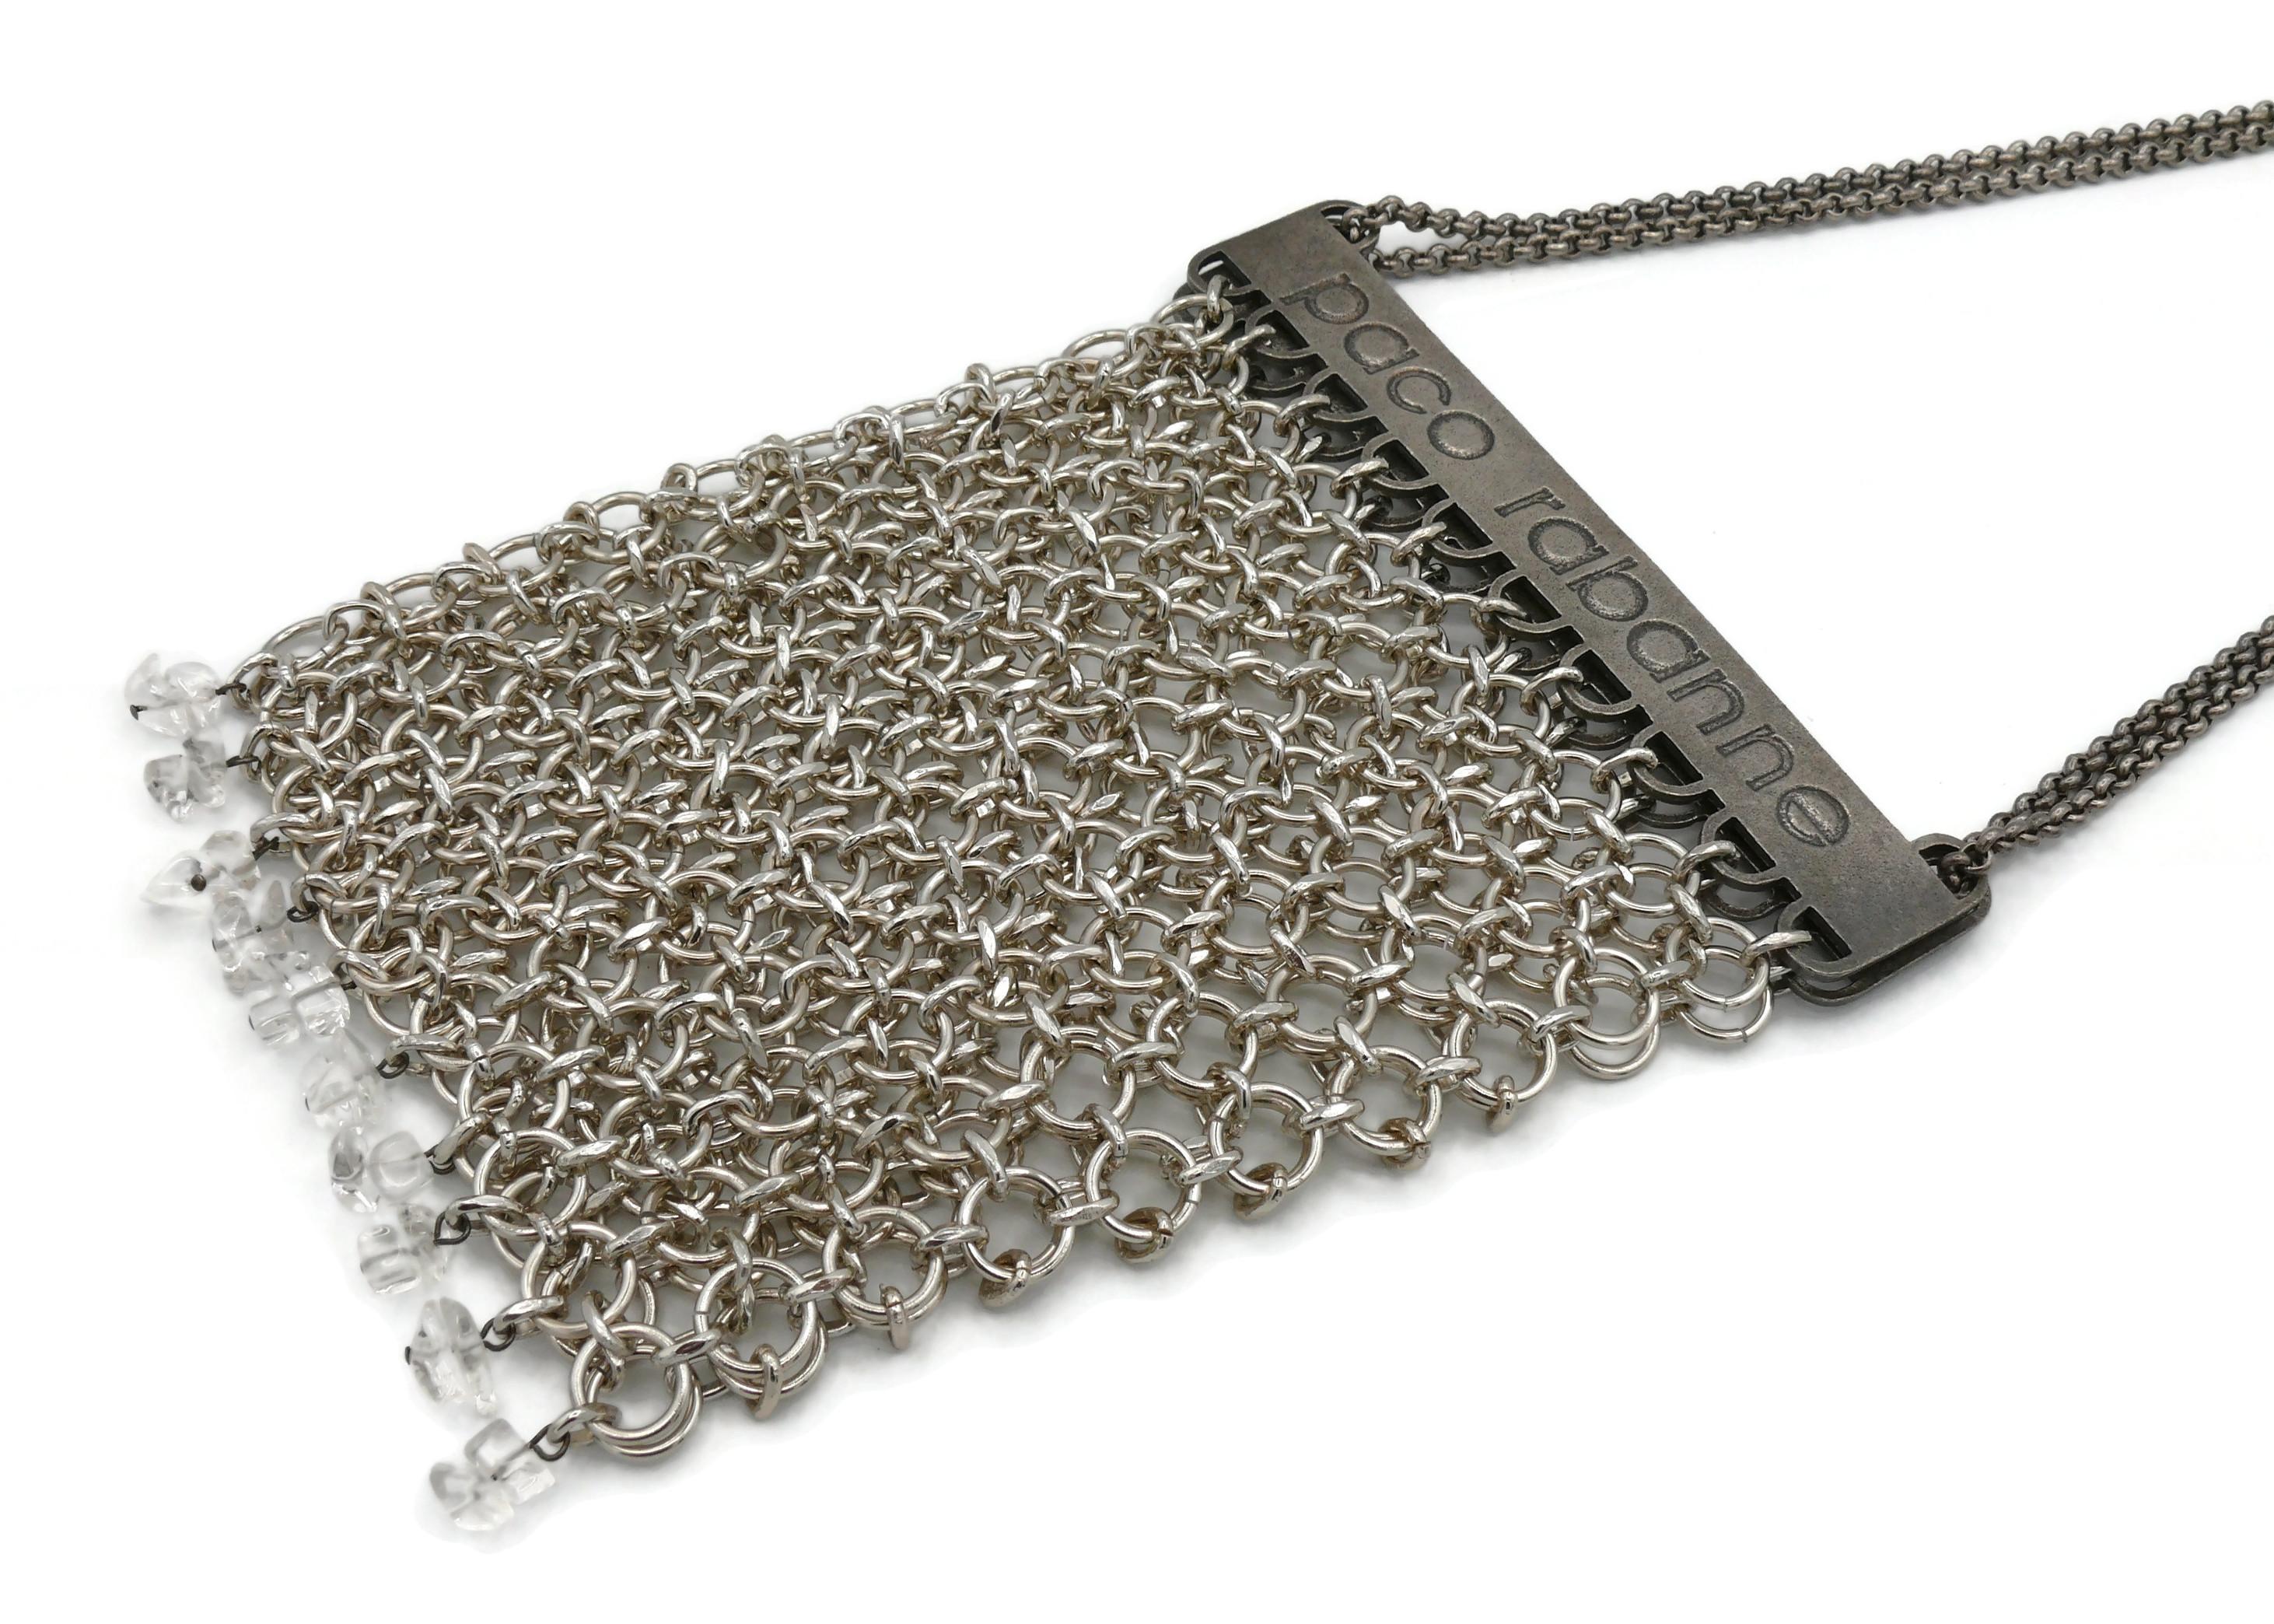 PACO RABANNE Vintage Mini Silver Tone Chainmail Messenger Bag For Sale 8